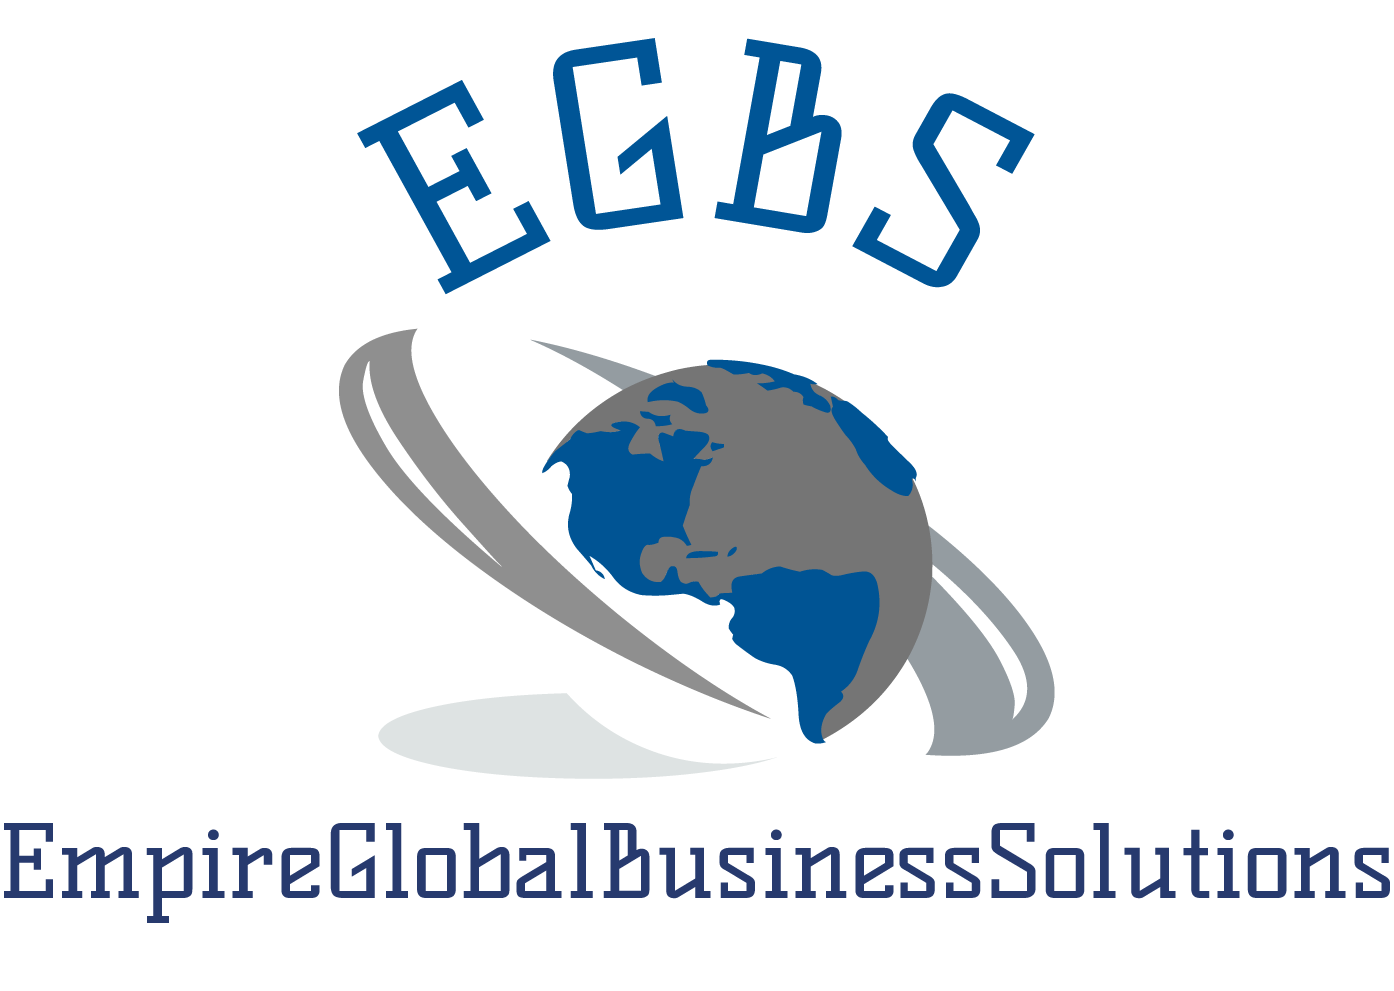 Empire Global Business Solutions